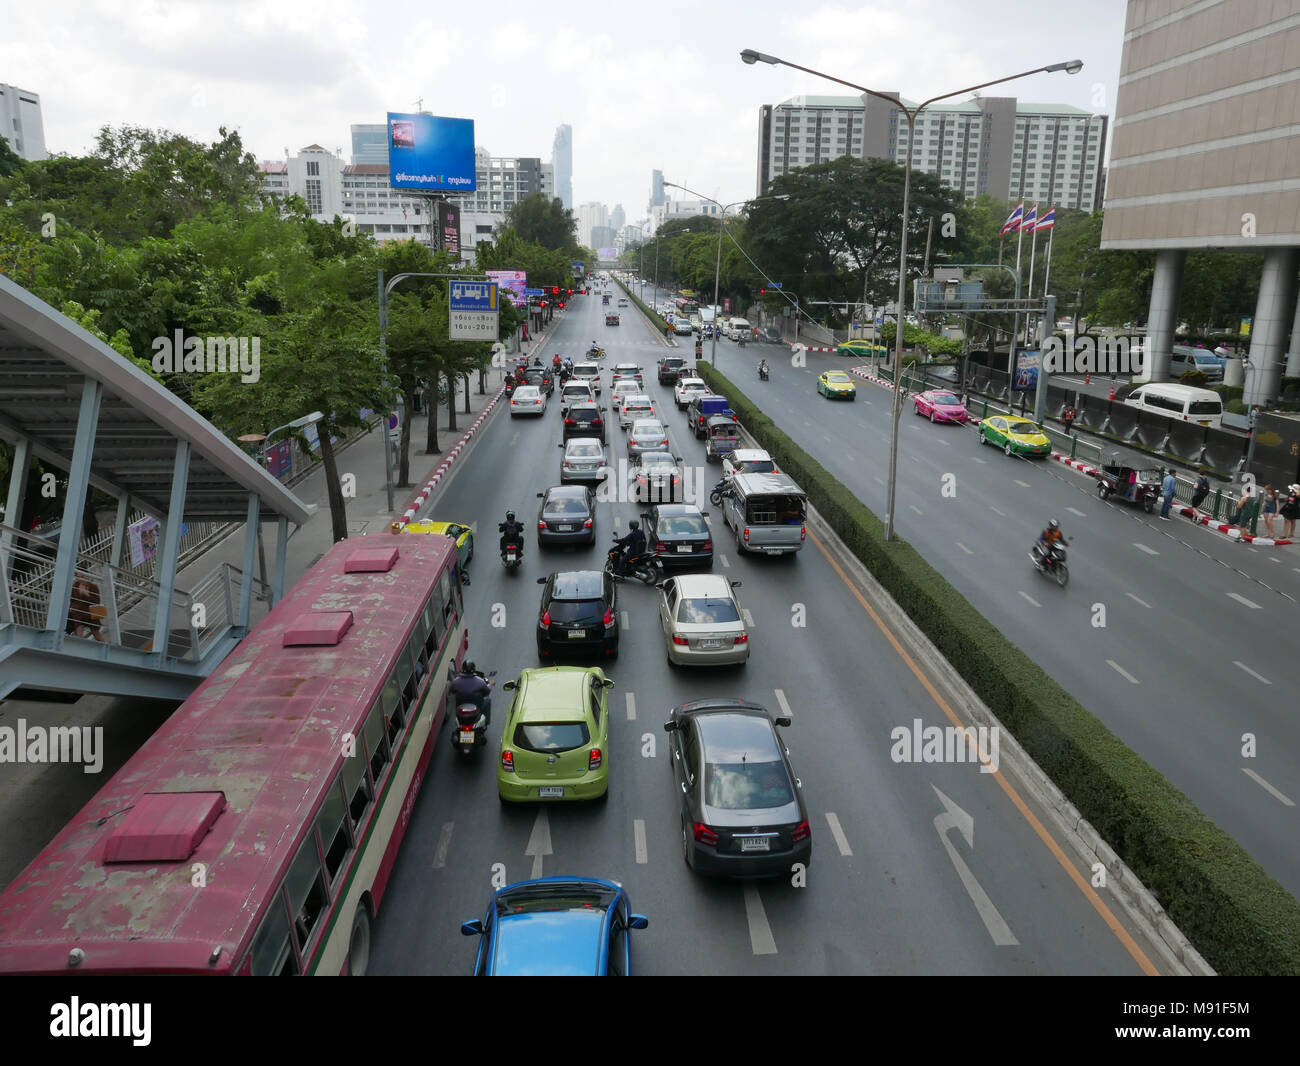 The Phayathanai Road with traffic seen from the bridge leading into the MBK shopping centre in Bangkok, Thailand Stock Photo